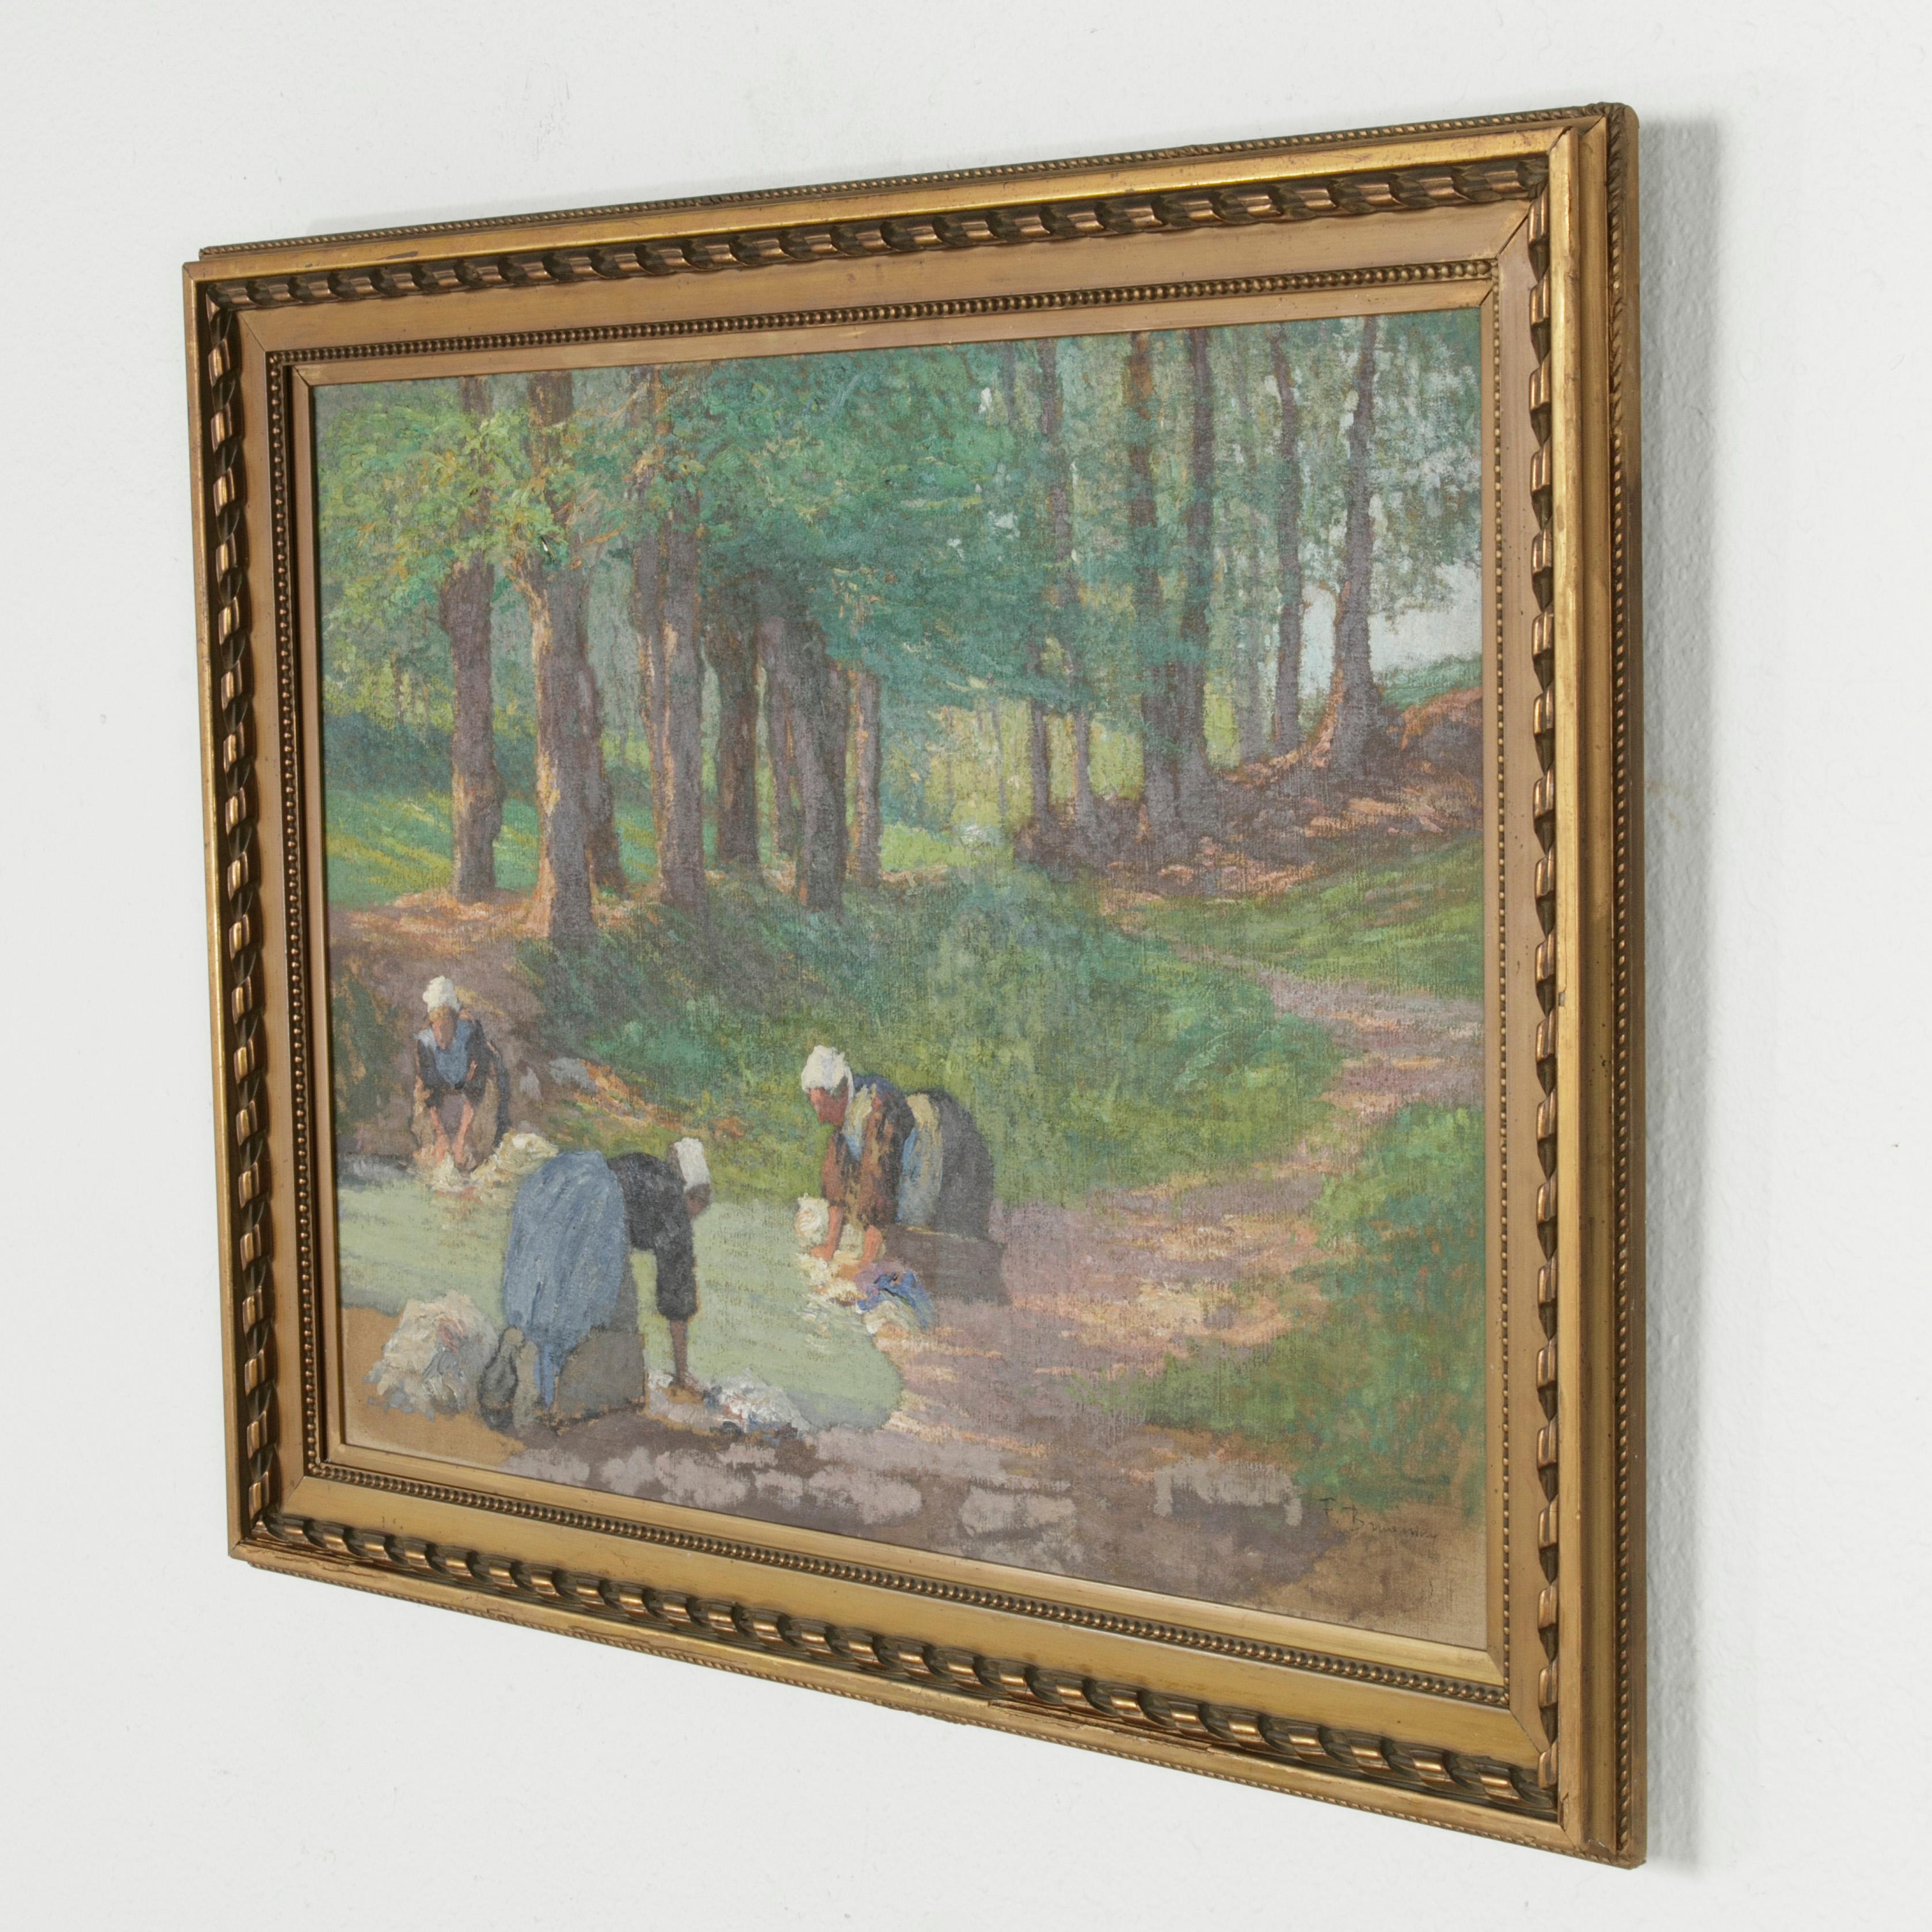 Measuring 24 inches in height and 32 inches in width unframed, this large oil on canvas painting from the early 20th century depicts a pastoral scene at the riverside. In the lower left are three laundresses at work. Signed by the artist, this